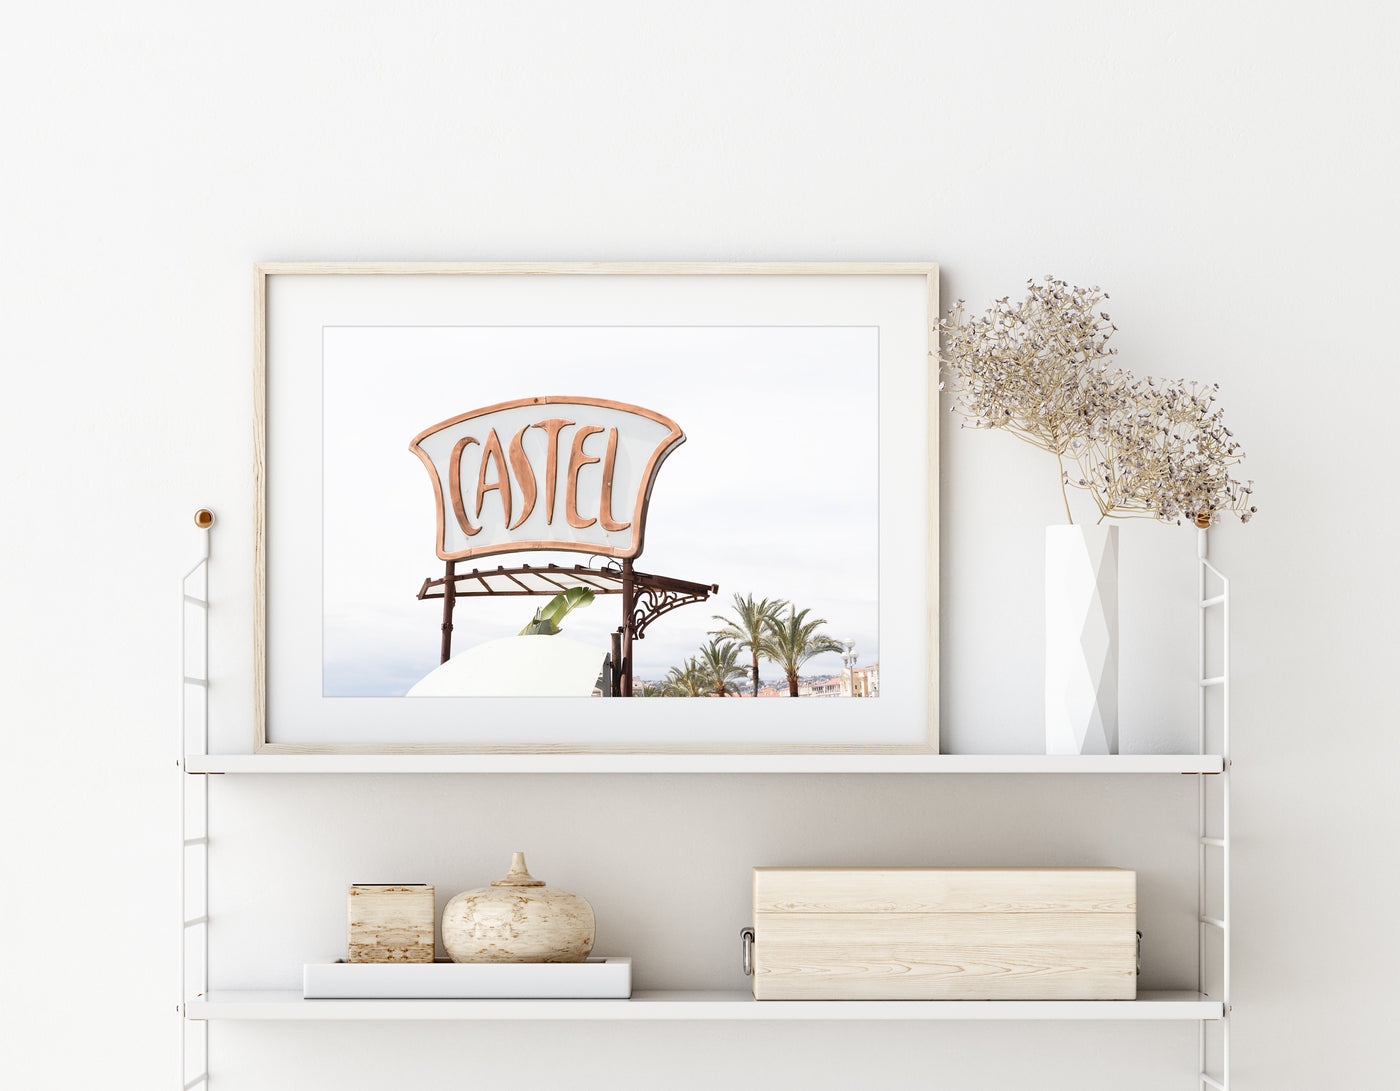 French Riviera No 6 - Castel Plage beach club art print by Cattie Coyle Photography 